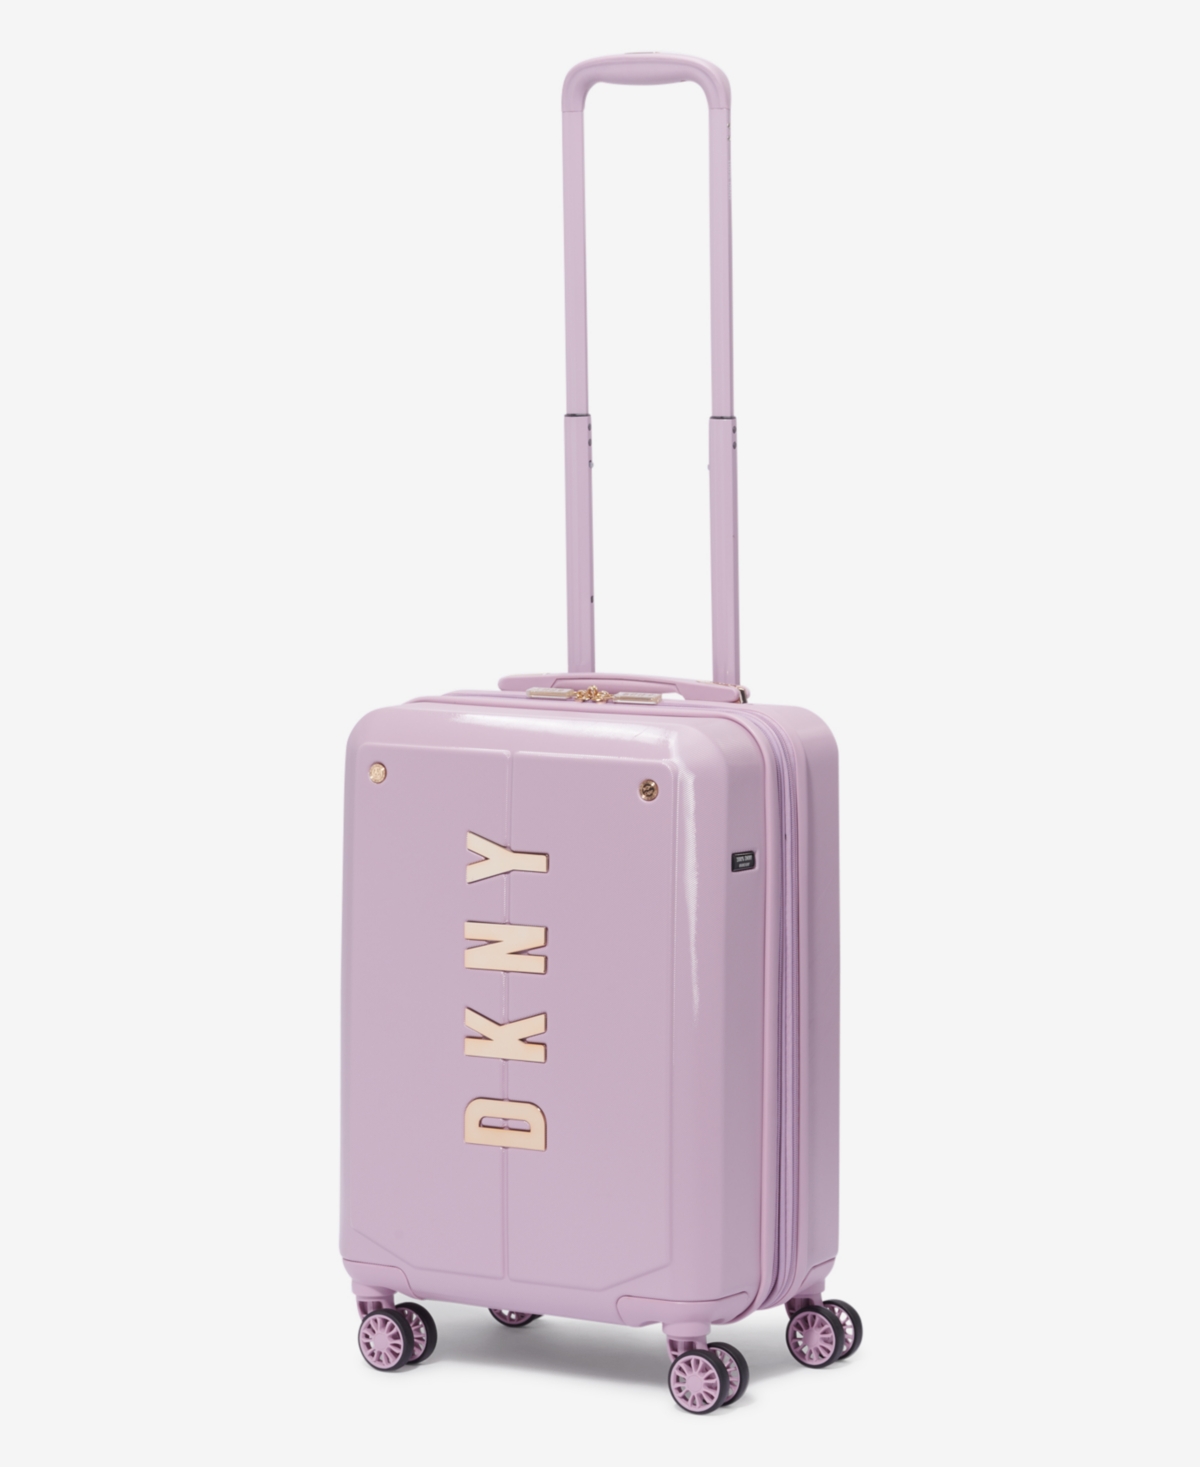 Dkny Nyc 20" Upright Carry-on In Lavender